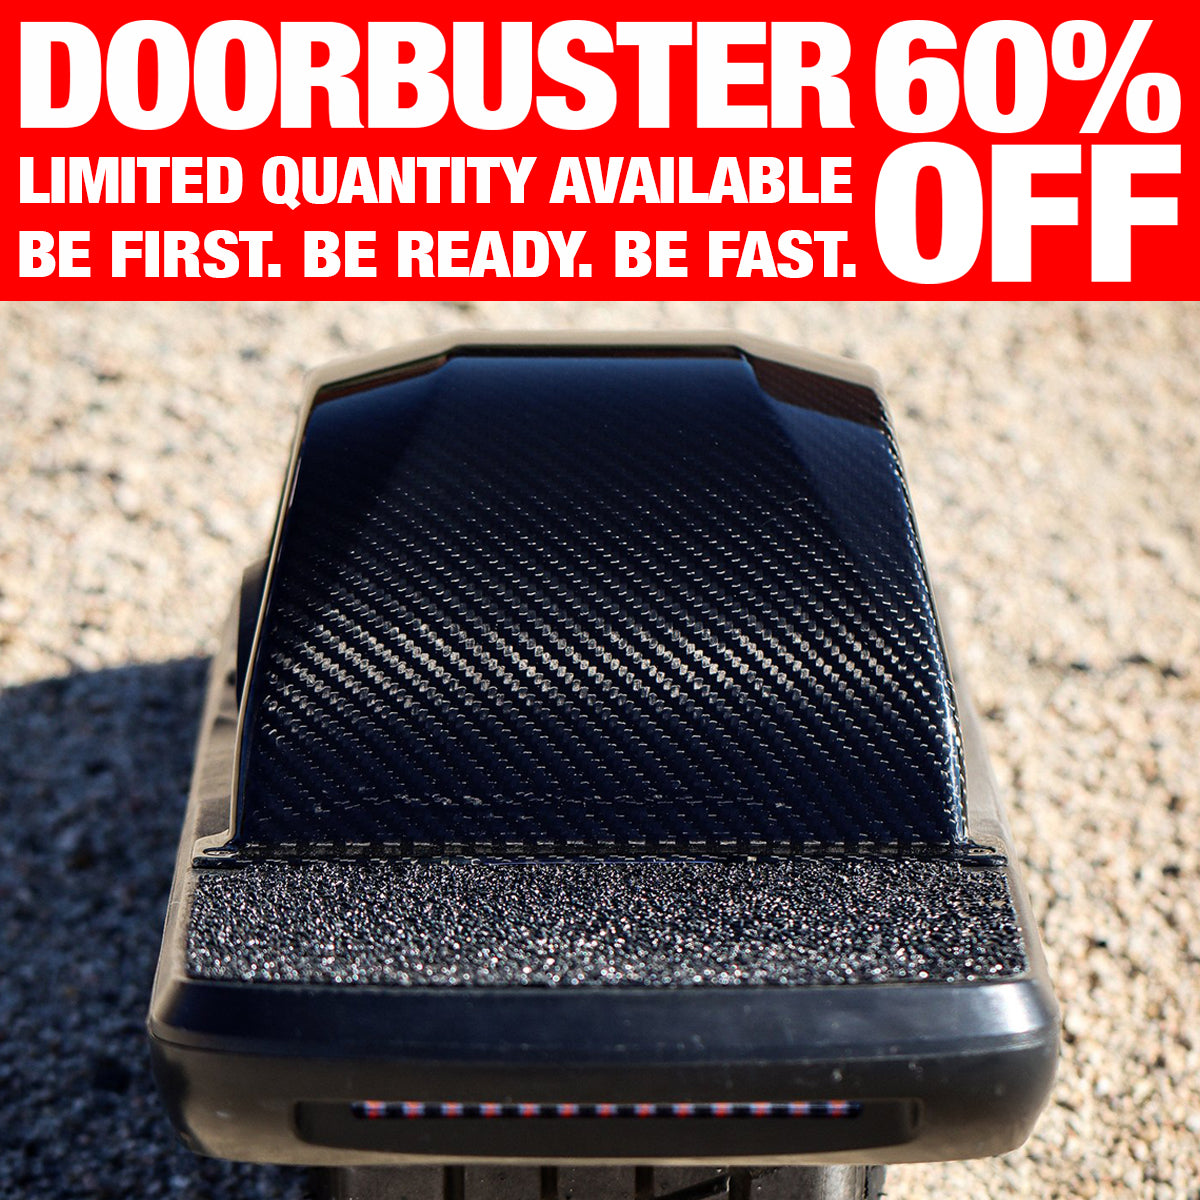 DOORBUSTER 60% 33 BE FAS DY. LIMITED QUANTITY AVAILABLE S g 